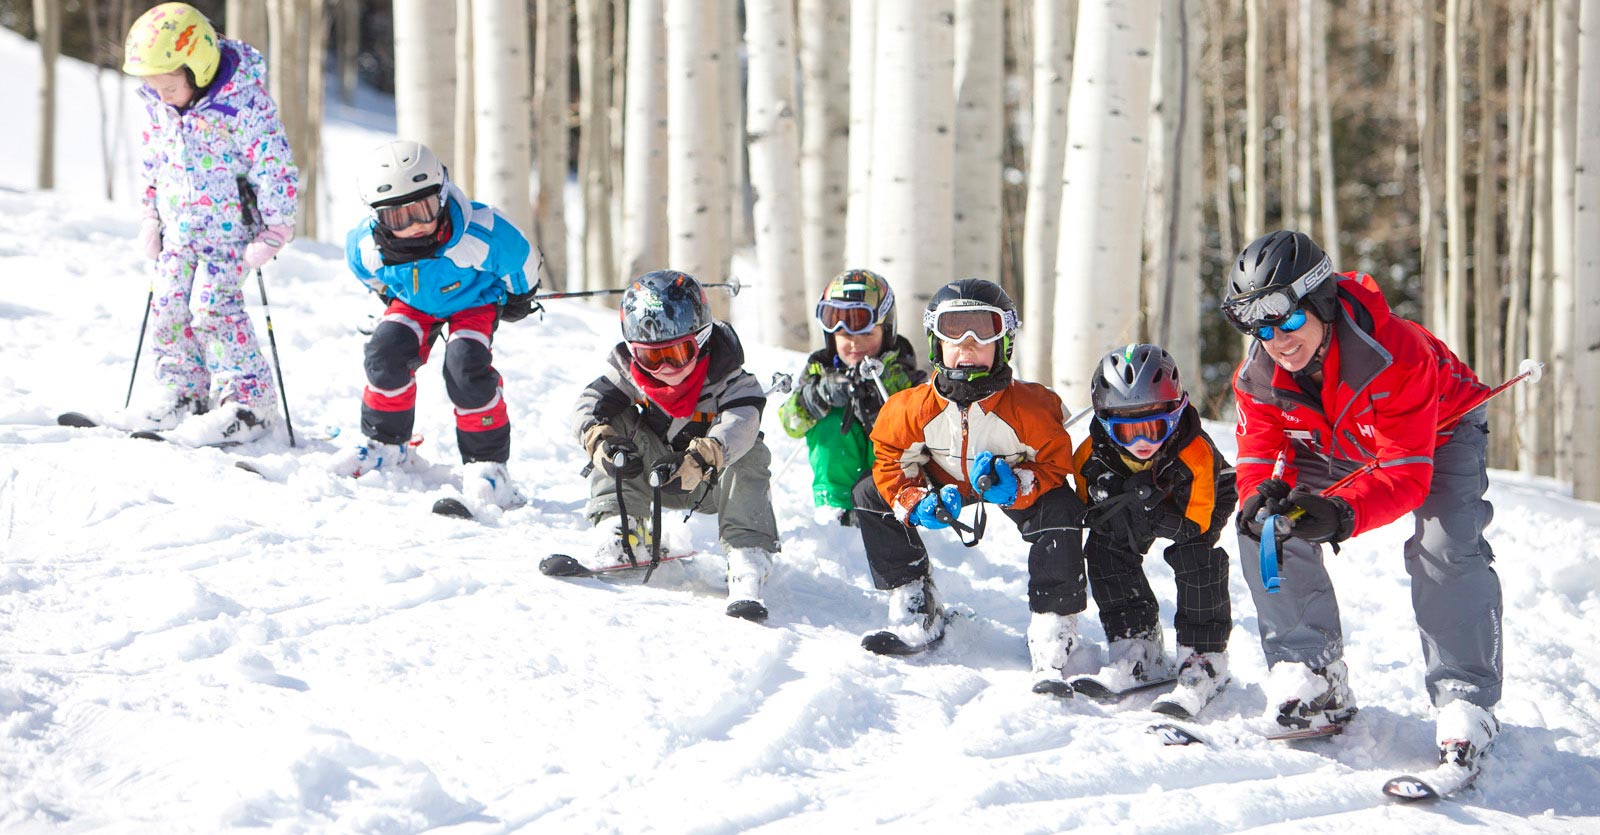 Kids Skiing Lessons at Snowmass - Aspen, Colorado